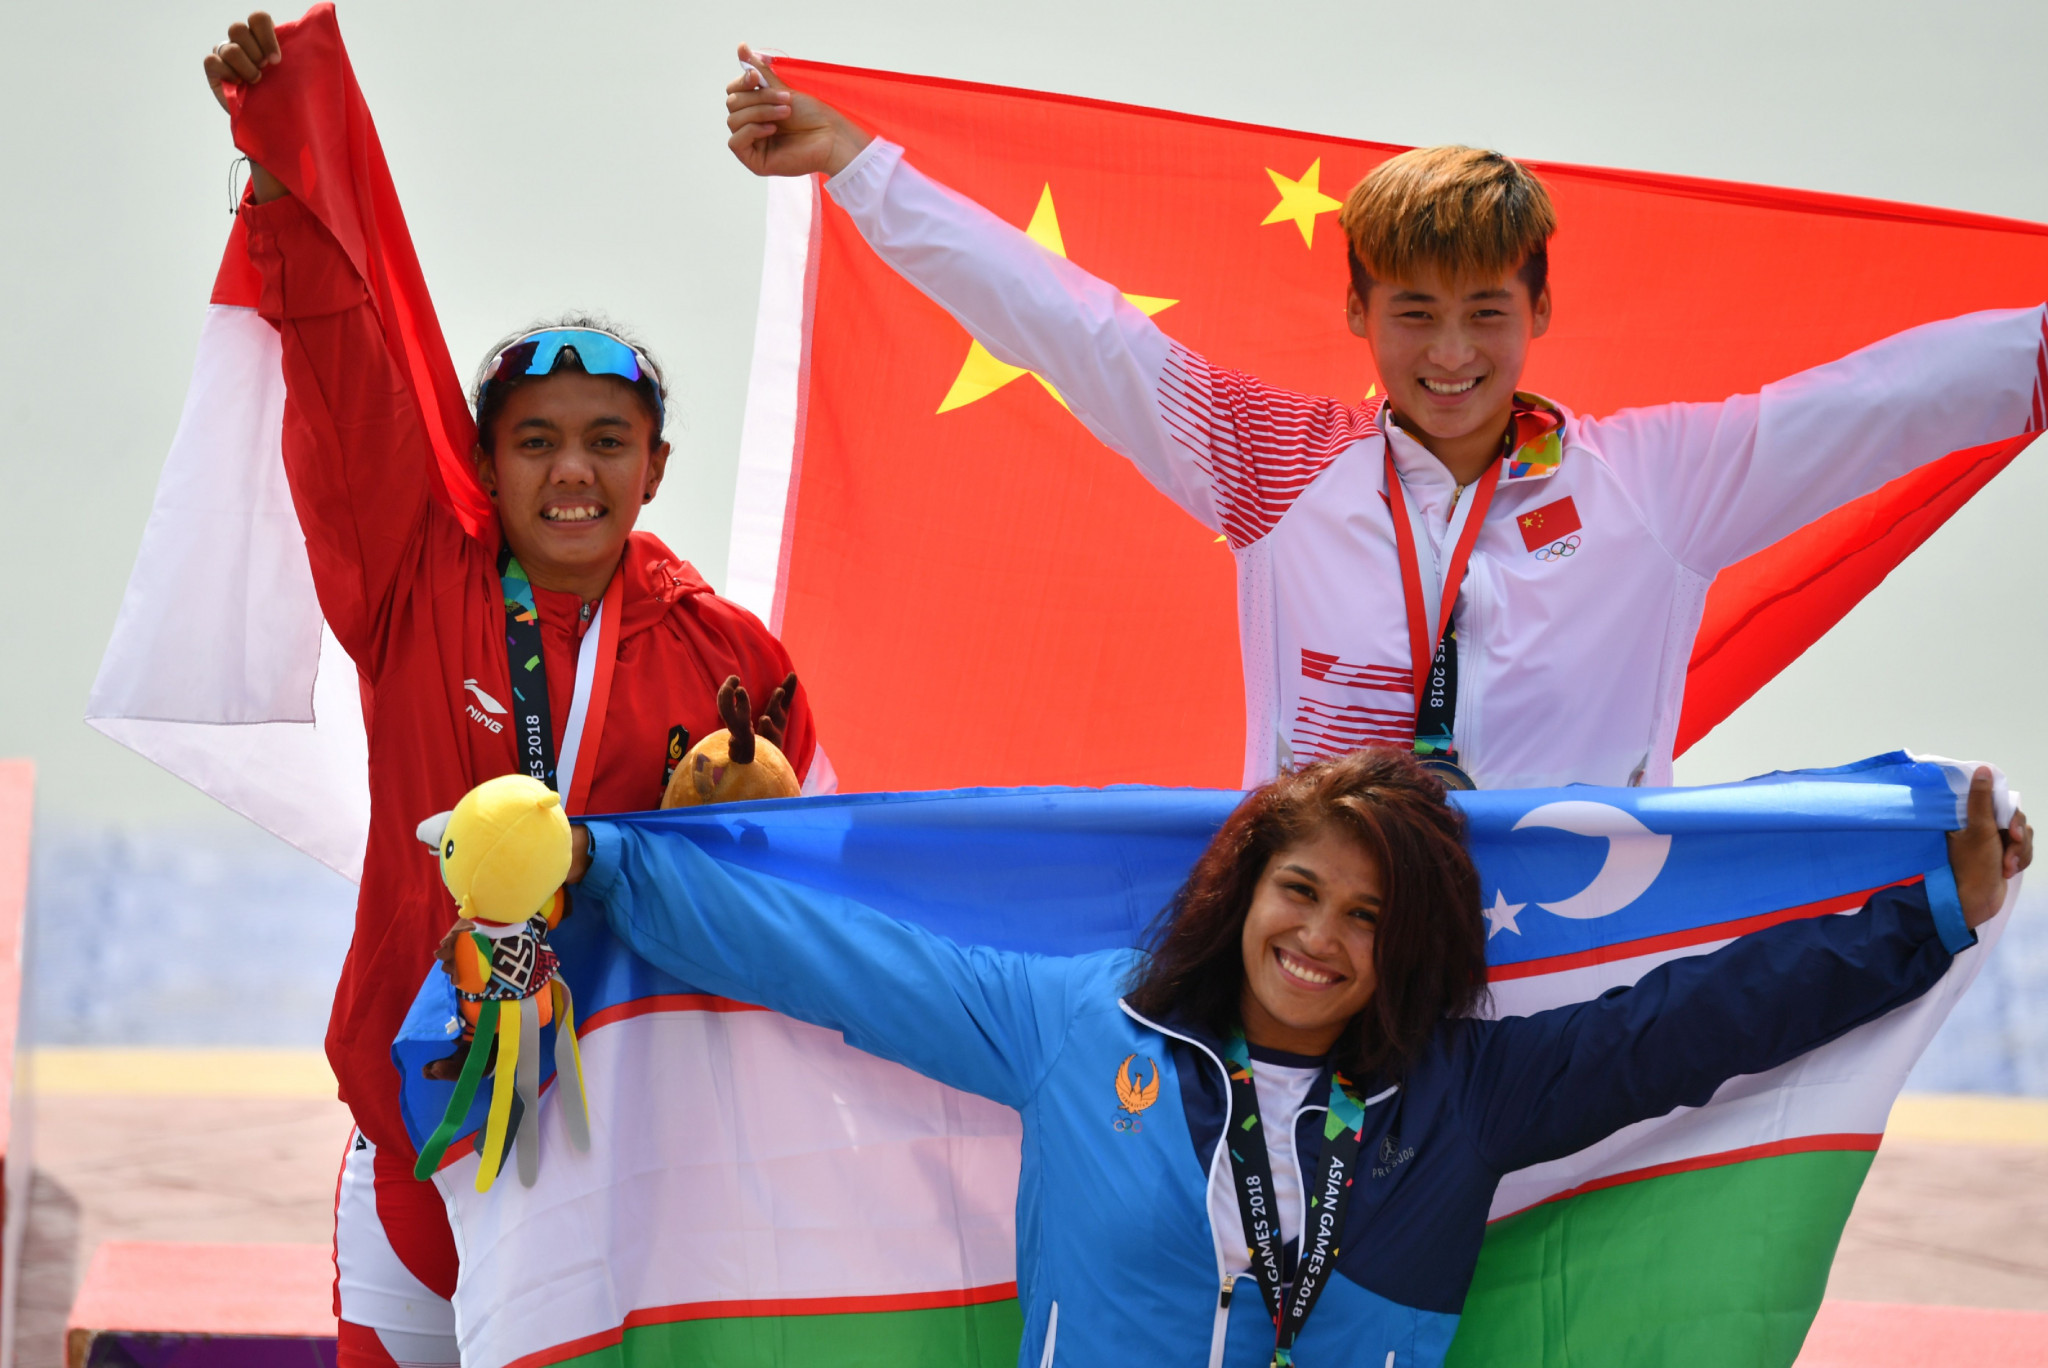 Dilnoza Rakhmatov, pictured centre after winning canoe sprint bronze at the 2018 Asian Games, has been named Uzbekistan's Female Athlete of 2019 at the end of a year where she earned world bronze in the C2-200m doubles event.